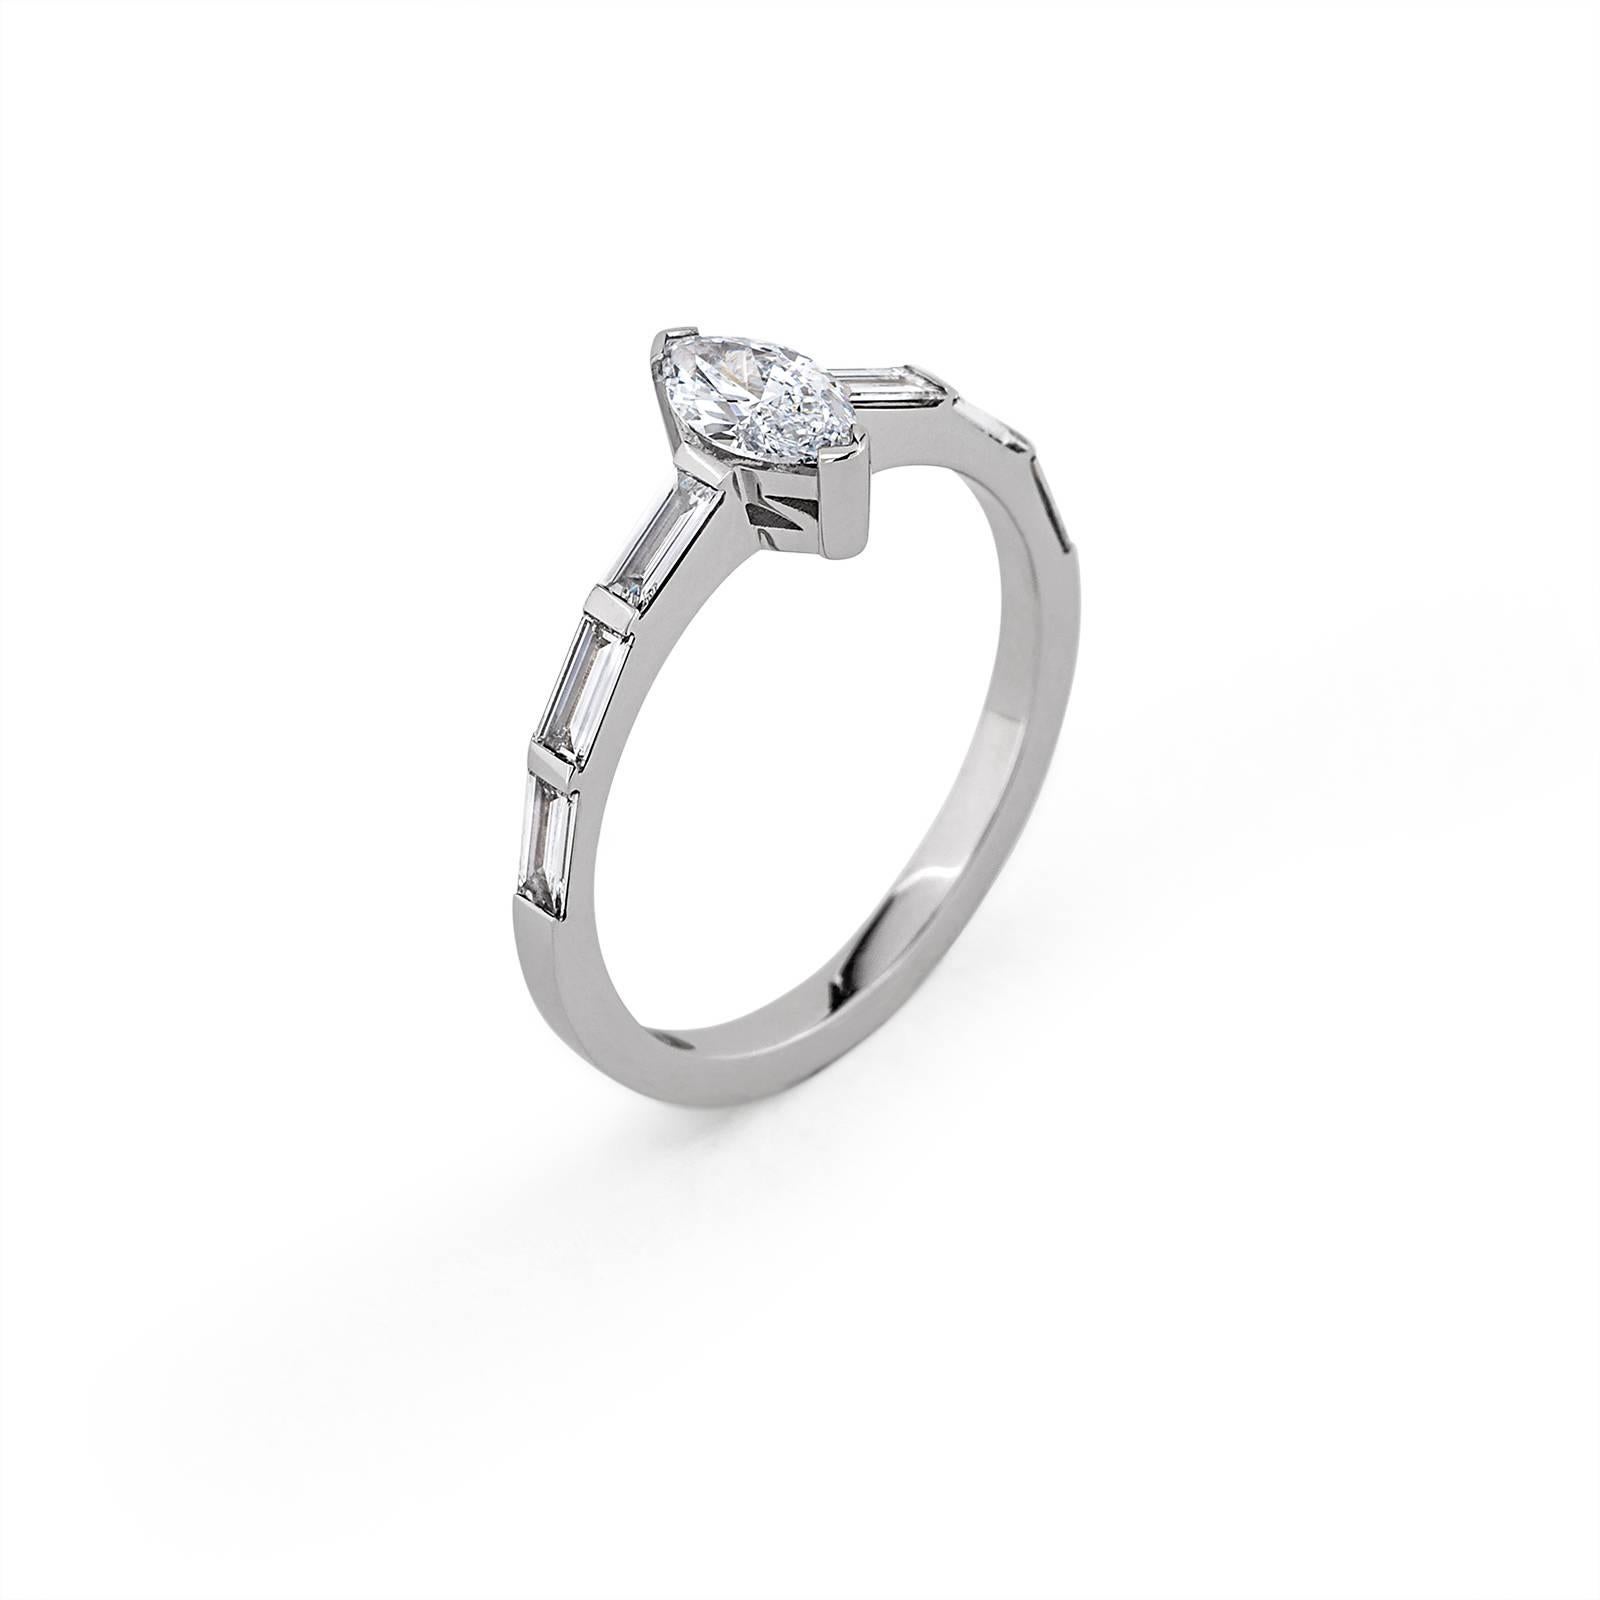 Catharina inspired by Catharina Belgica van Oranje

Catharina was a woman of understated elegance with an affinity for artisans. This delicate balance inspired the Catharina engagement ring.

A striking House of Eléonore marquise cut 0.46 carat